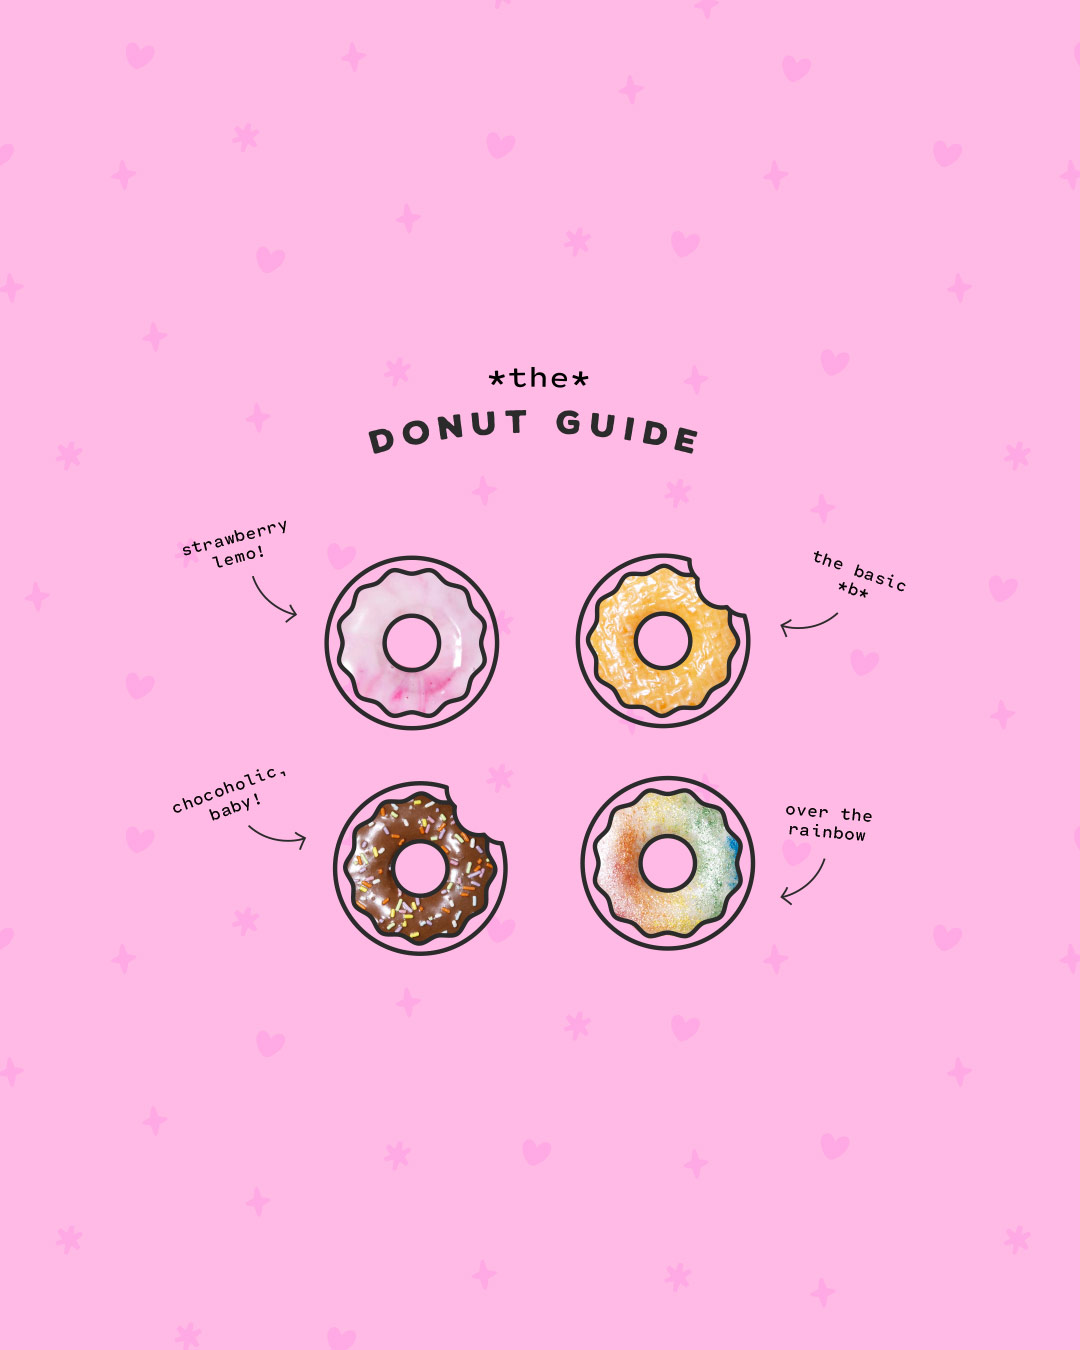 Donut guide for Dough Joy, a plant-based, yeast-raised donut truck in Seattle - designed by Wiltshire-based graphic designer, Kaye Huett